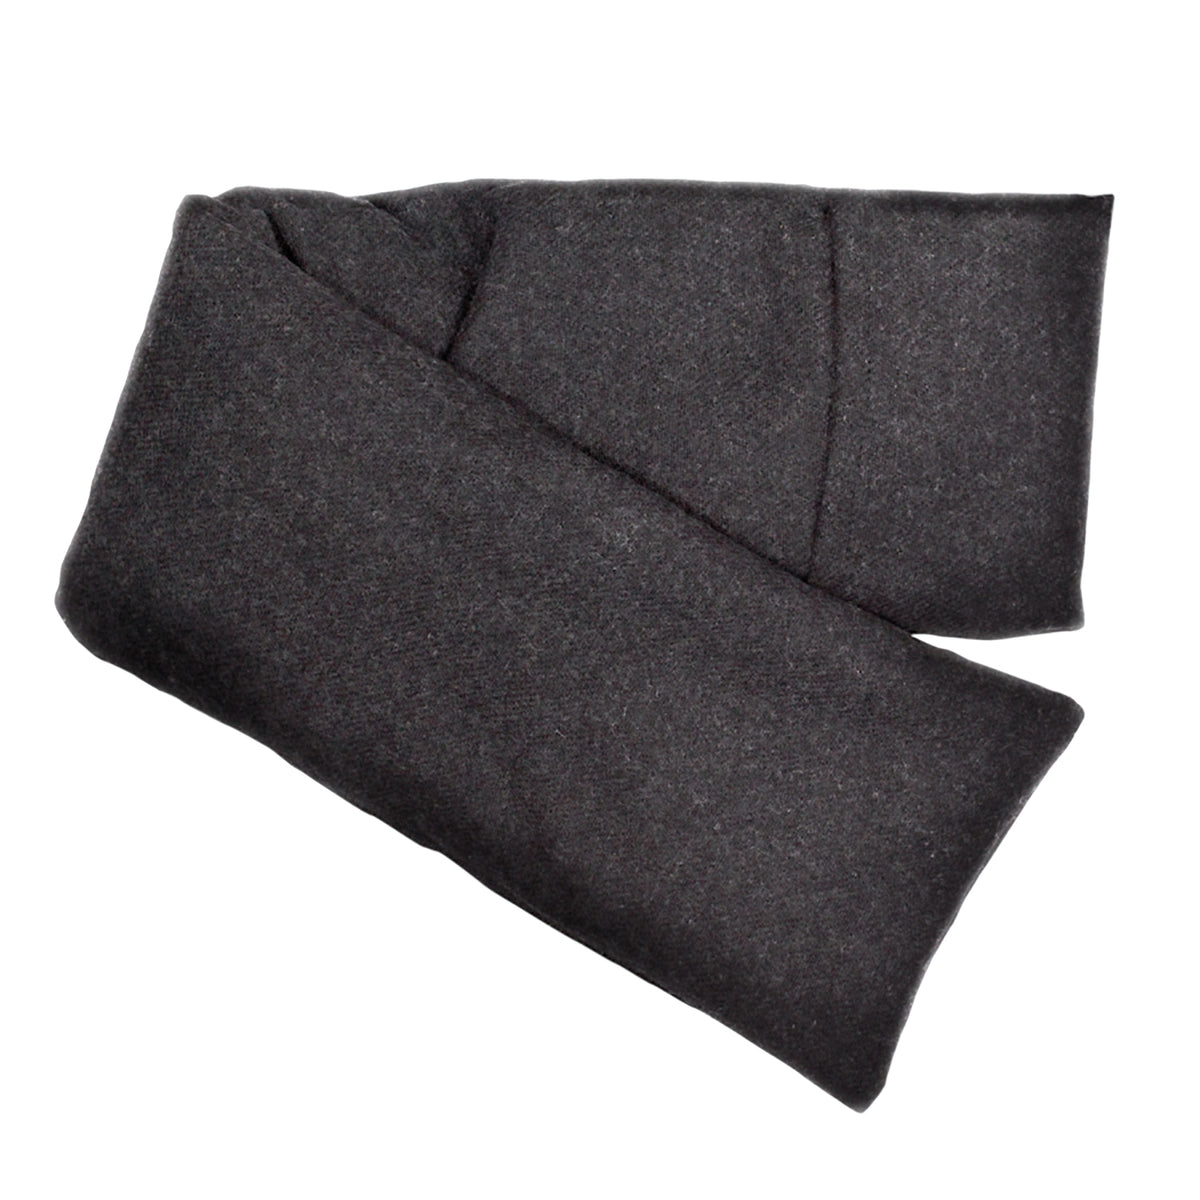 Wool - Charcoal Hot/Cold Flaxseed Pack